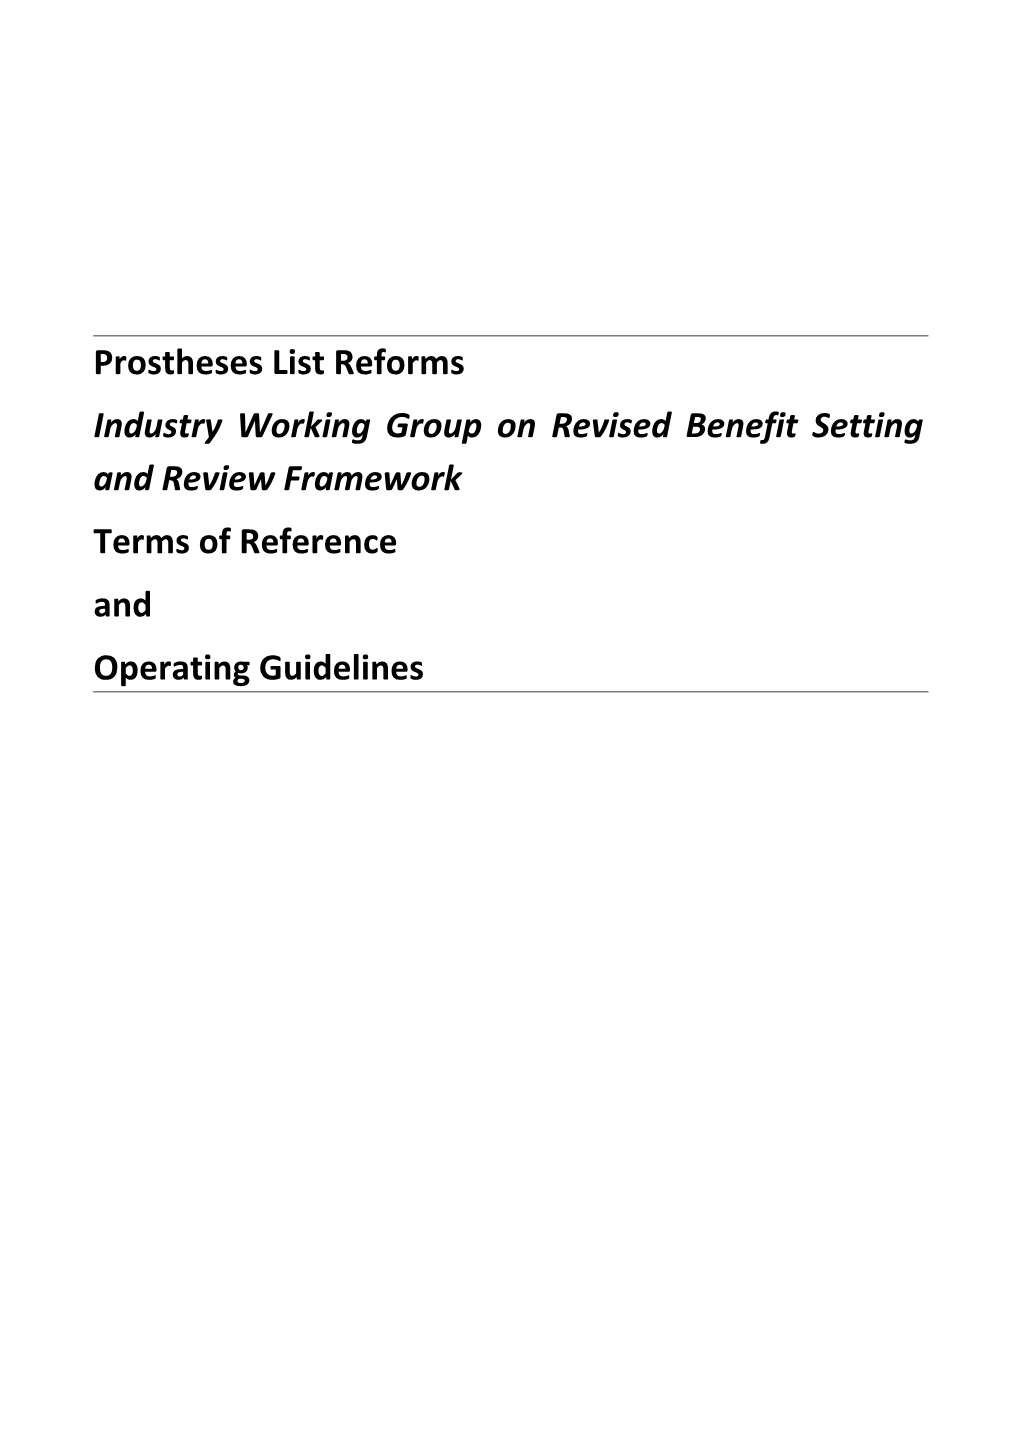 Industry Working Group on Revised Benefit Setting and Review Framework